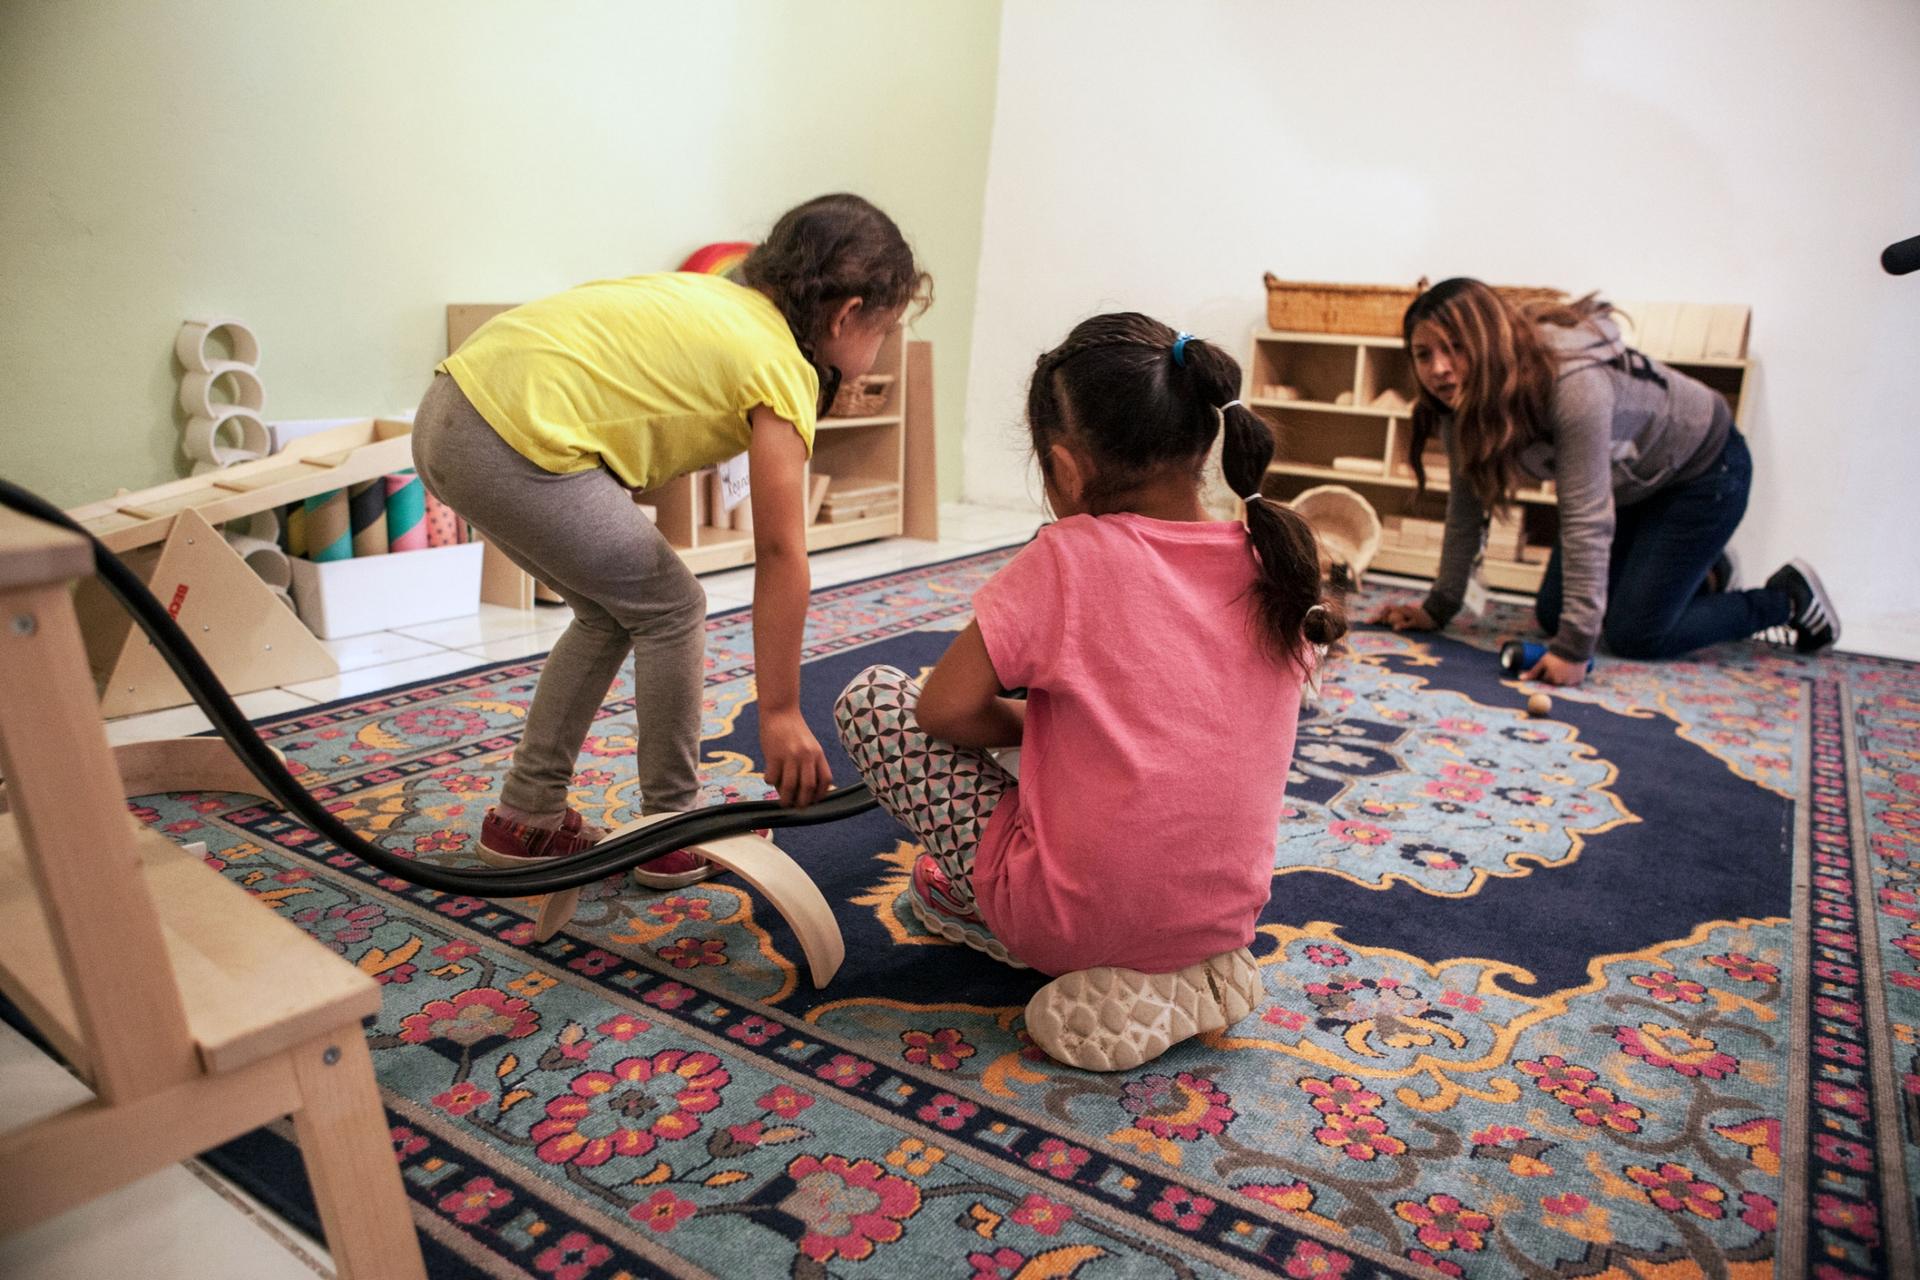 Two young girls are shown playing with a toy racing track.